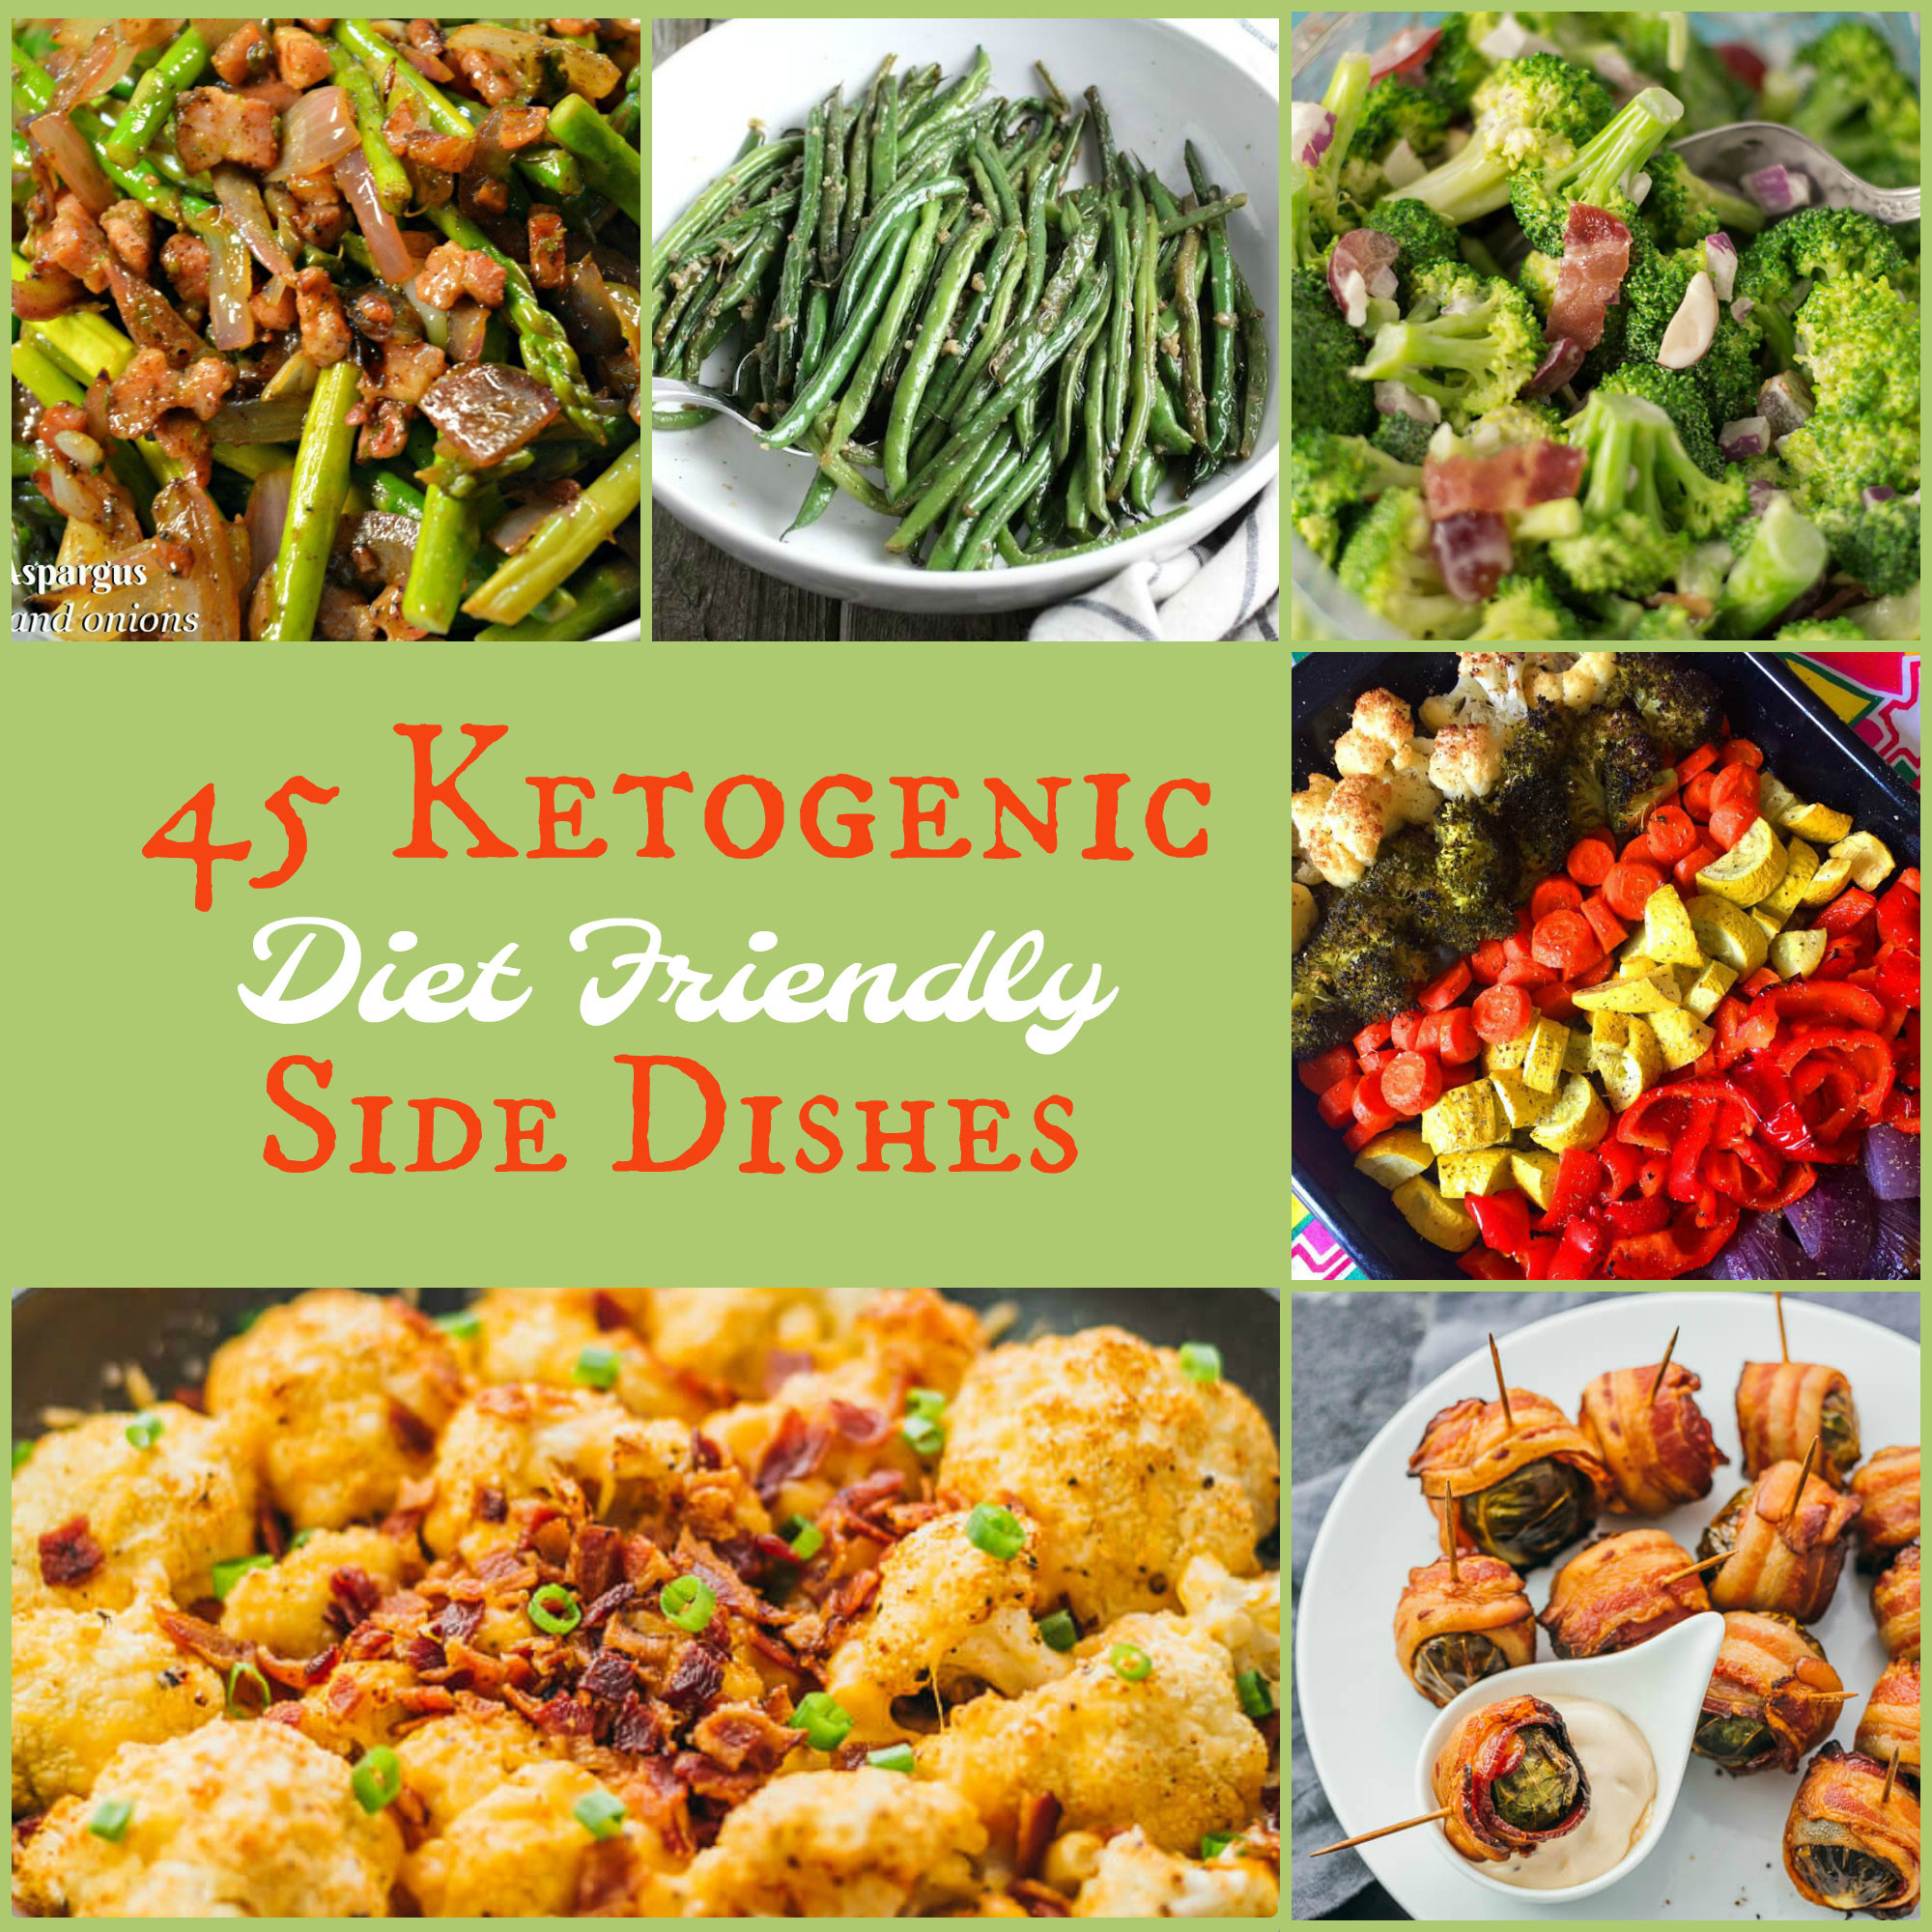 Keto Side Dishes
 Keto Diet Side Dishes for the Holidays Ketogenic recipe